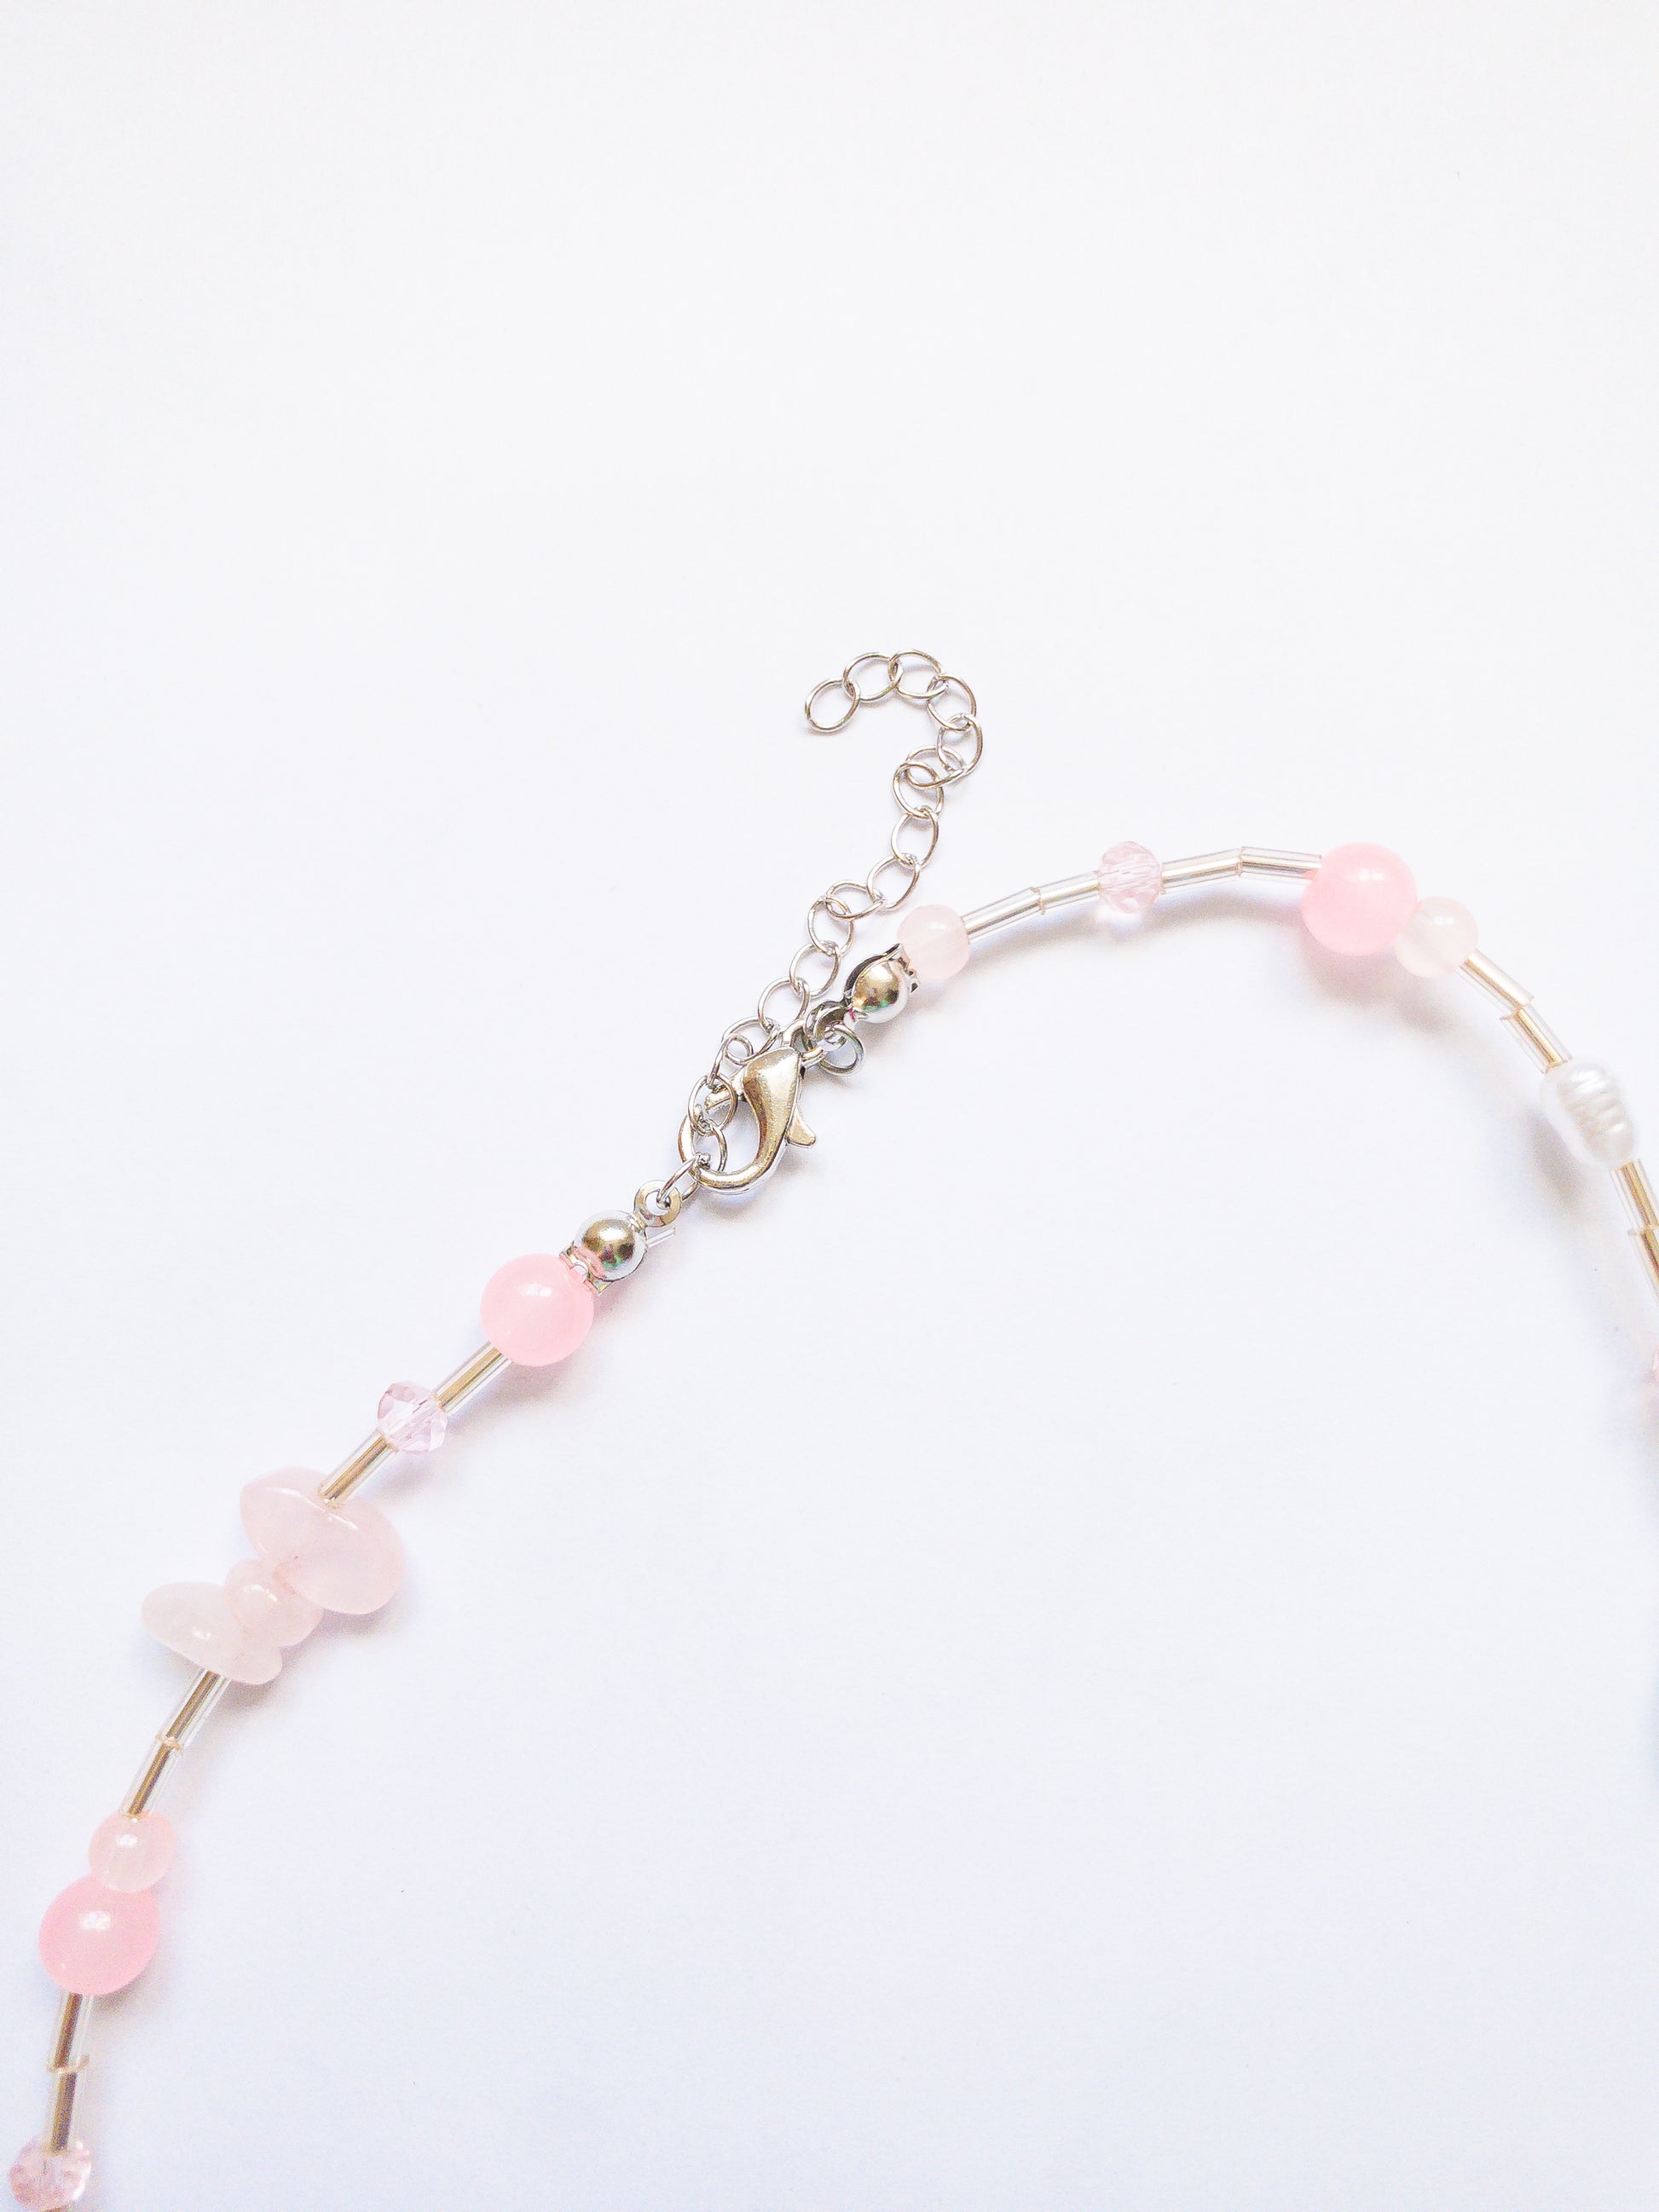 Pretty little beaded bow necklace with light pink and green stones, pearls, and a pink starfish. A subtle and delicate way to add bows to your look.